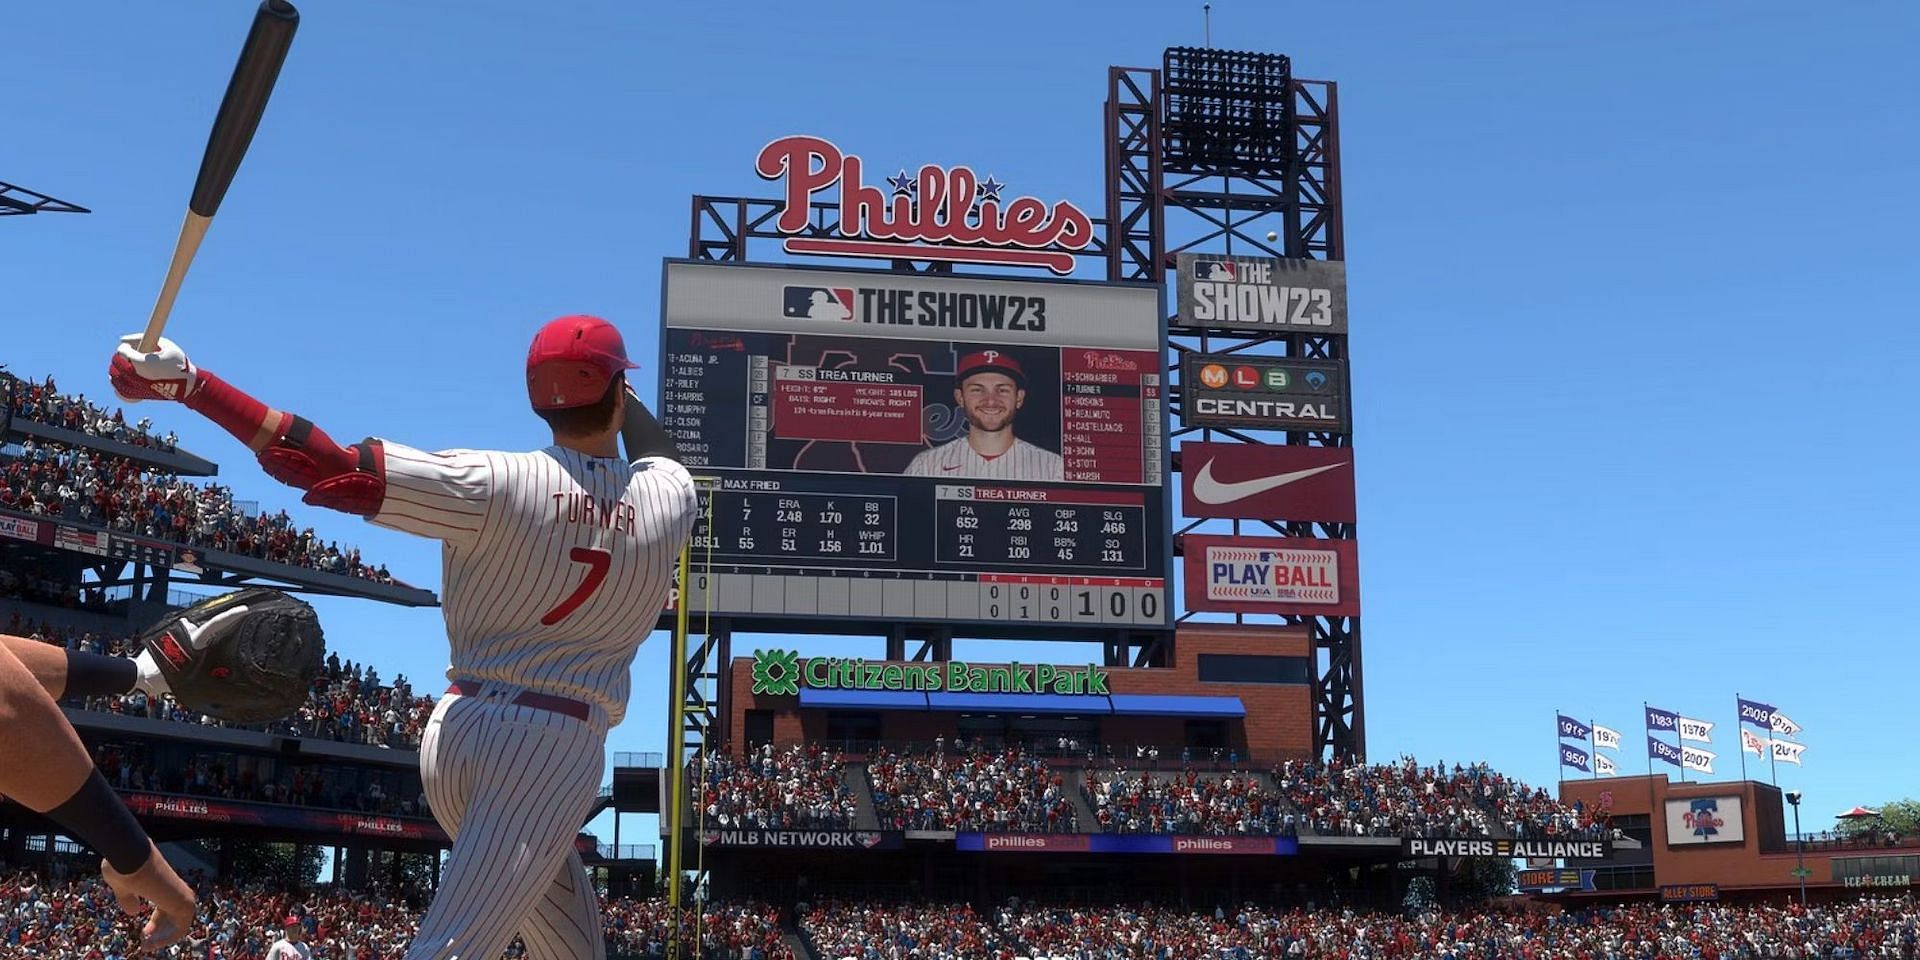 Completing Program Tasks yields XP faster in MLB The Show 23 (Image via San Diego Studio)